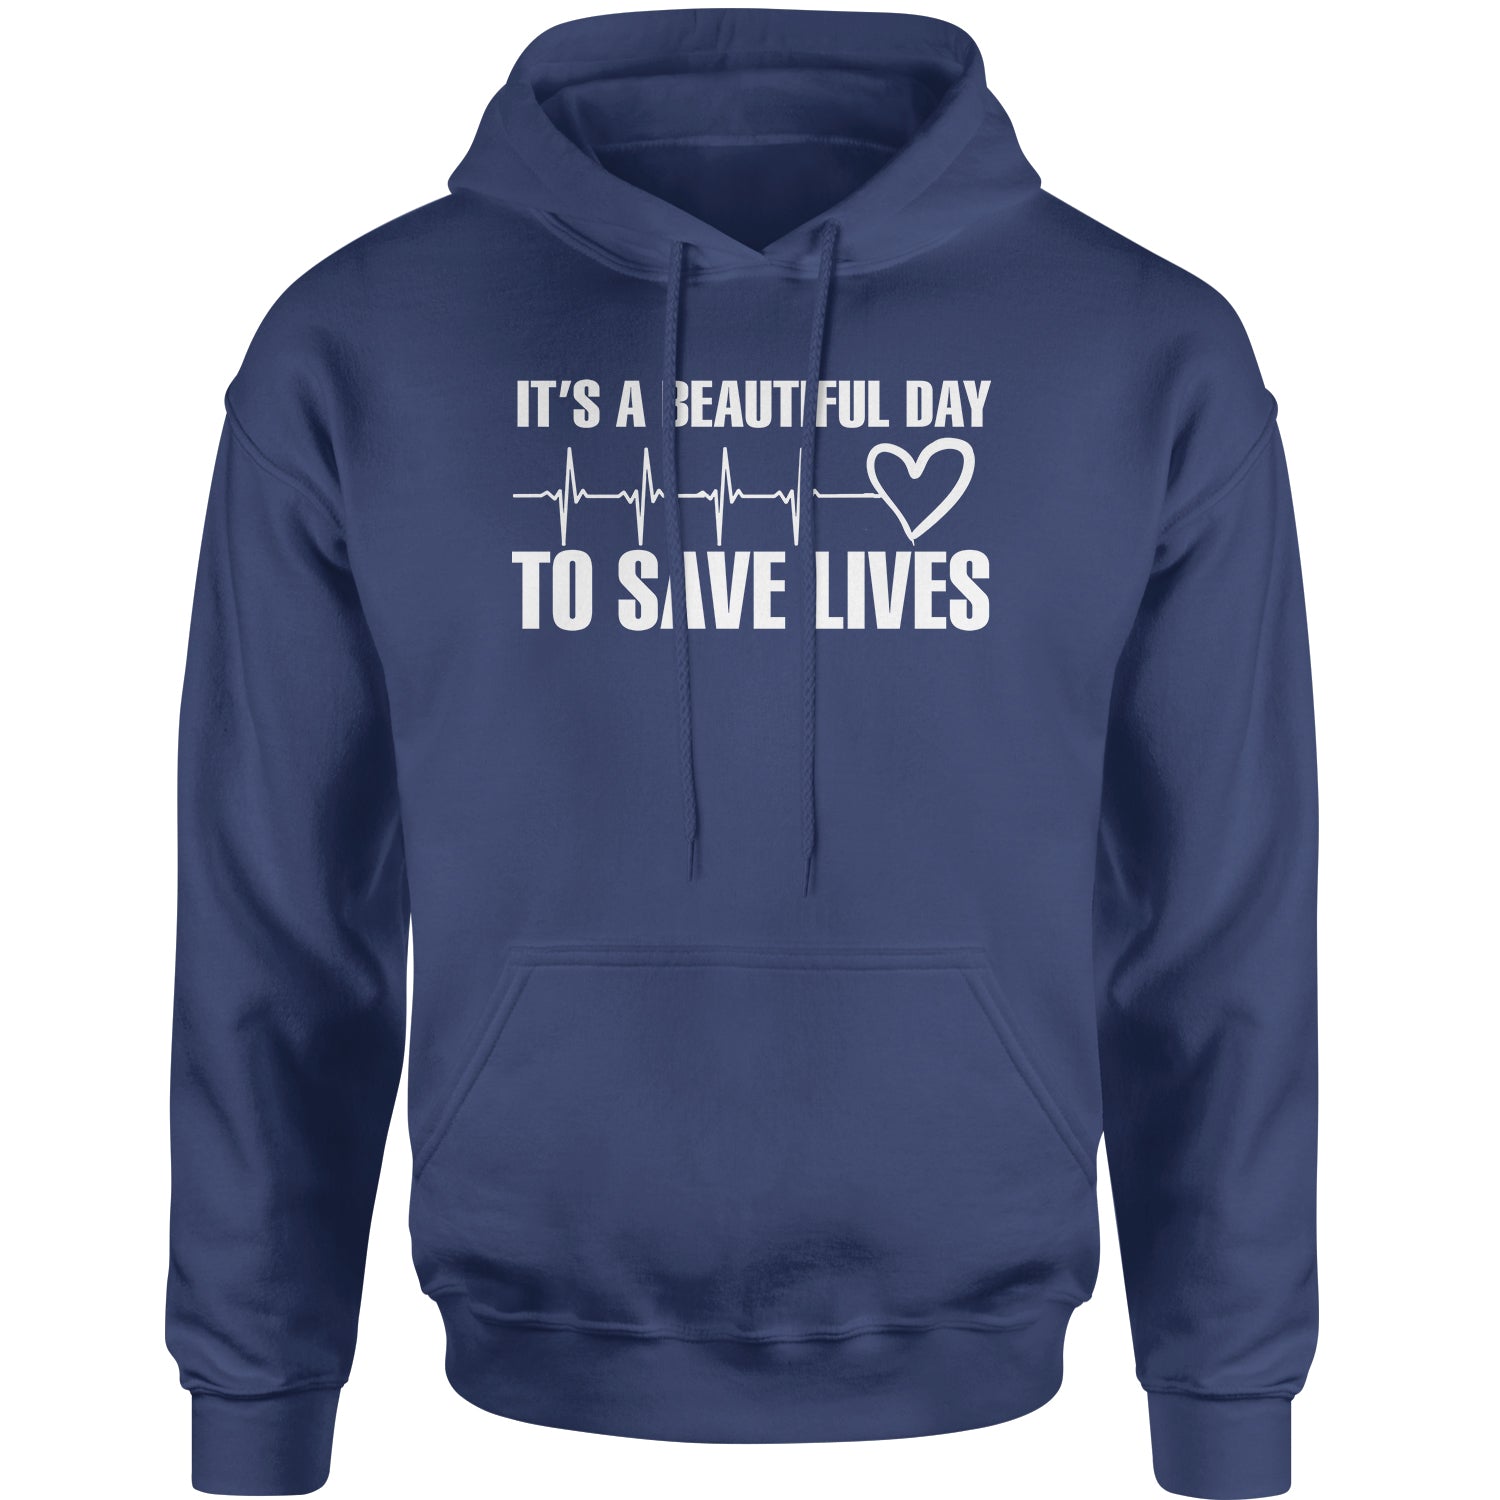 It's A Beautiful Day To Save Lives (White Print) Adult Hoodie Sweatshirt #expressiontees by Expression Tees